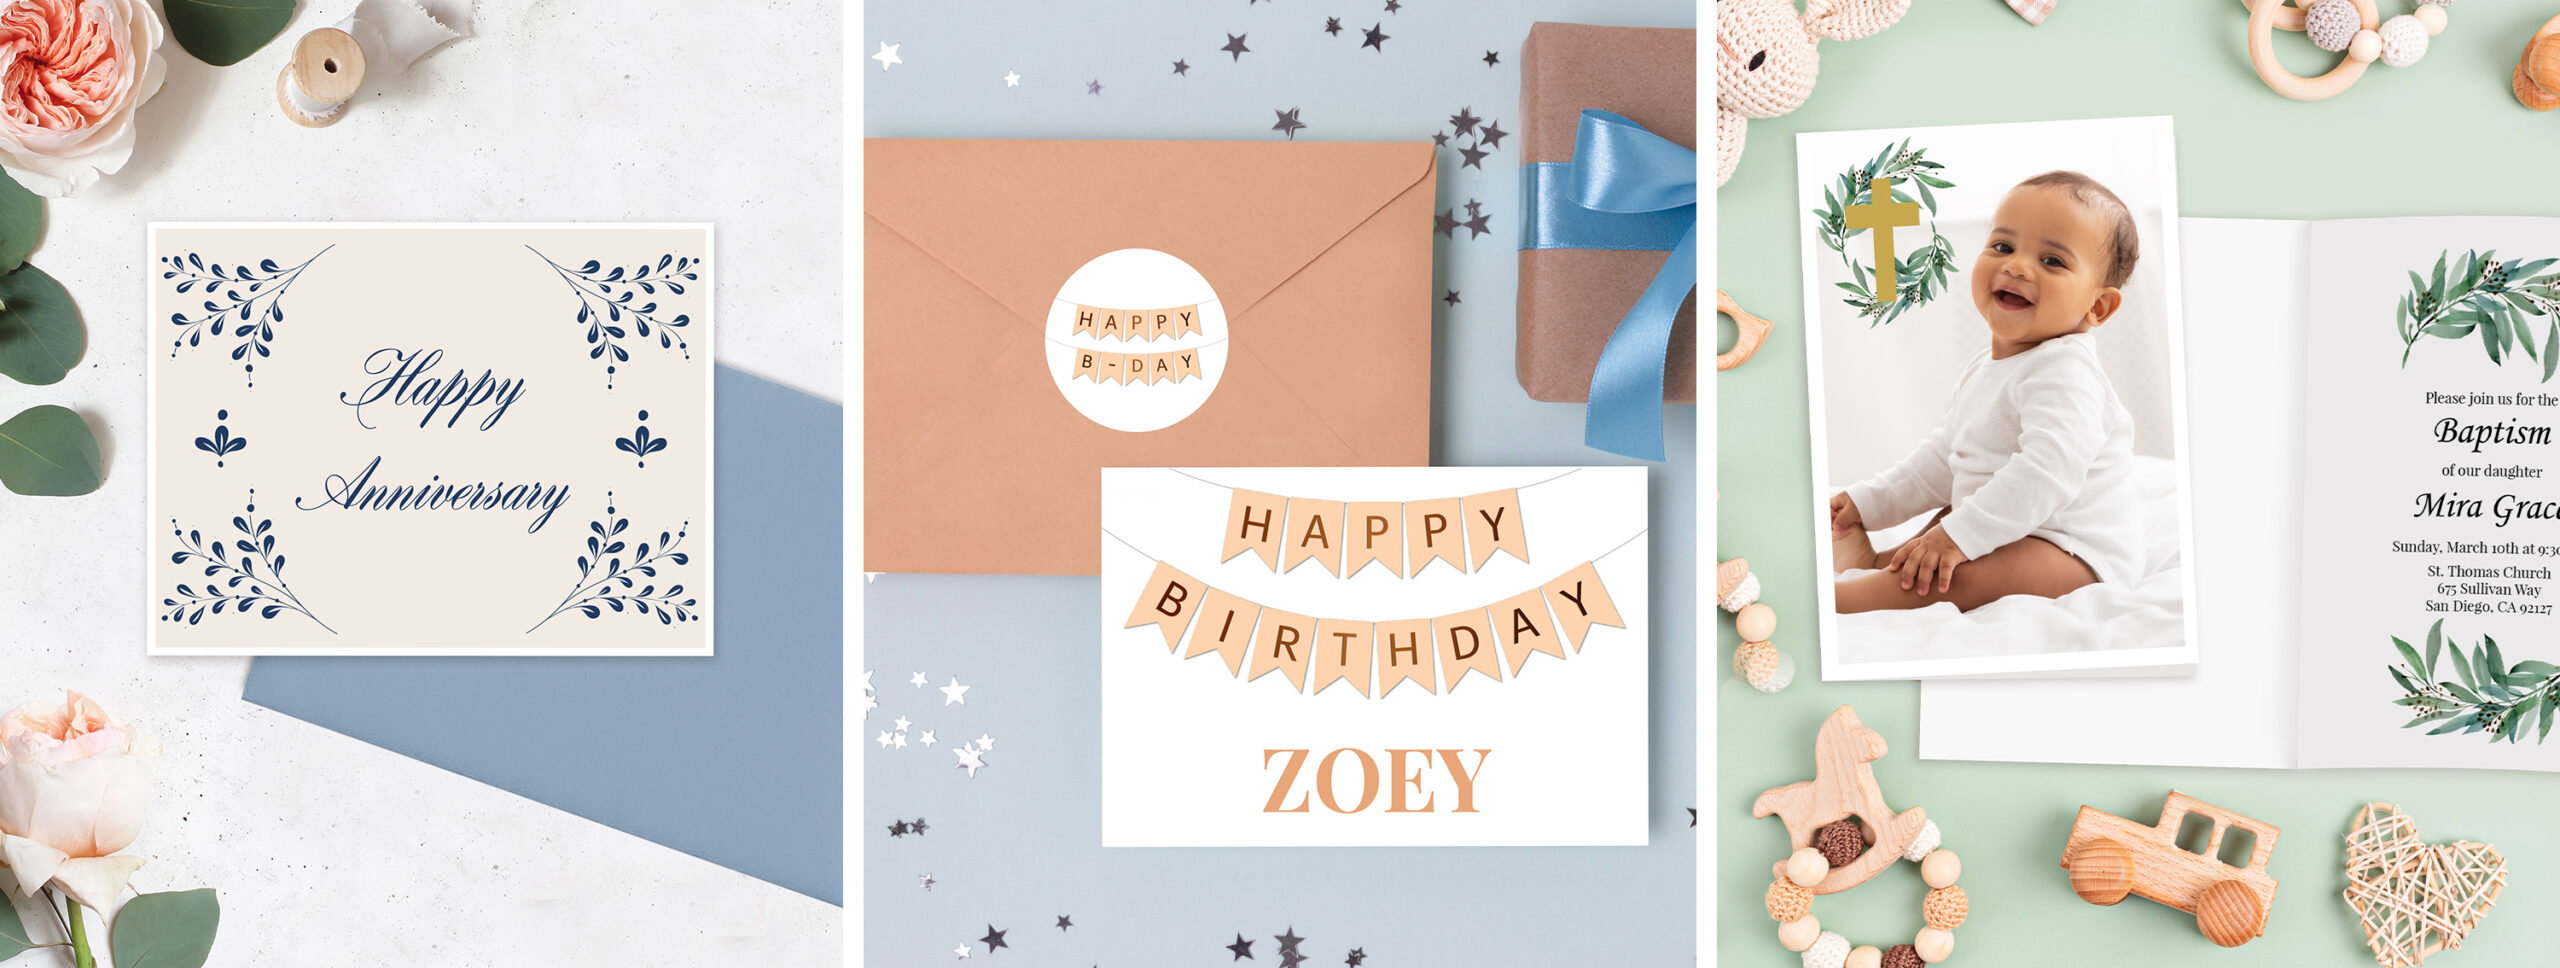 DIY Embroidered Birthday Cards - Crafting Cheerfully